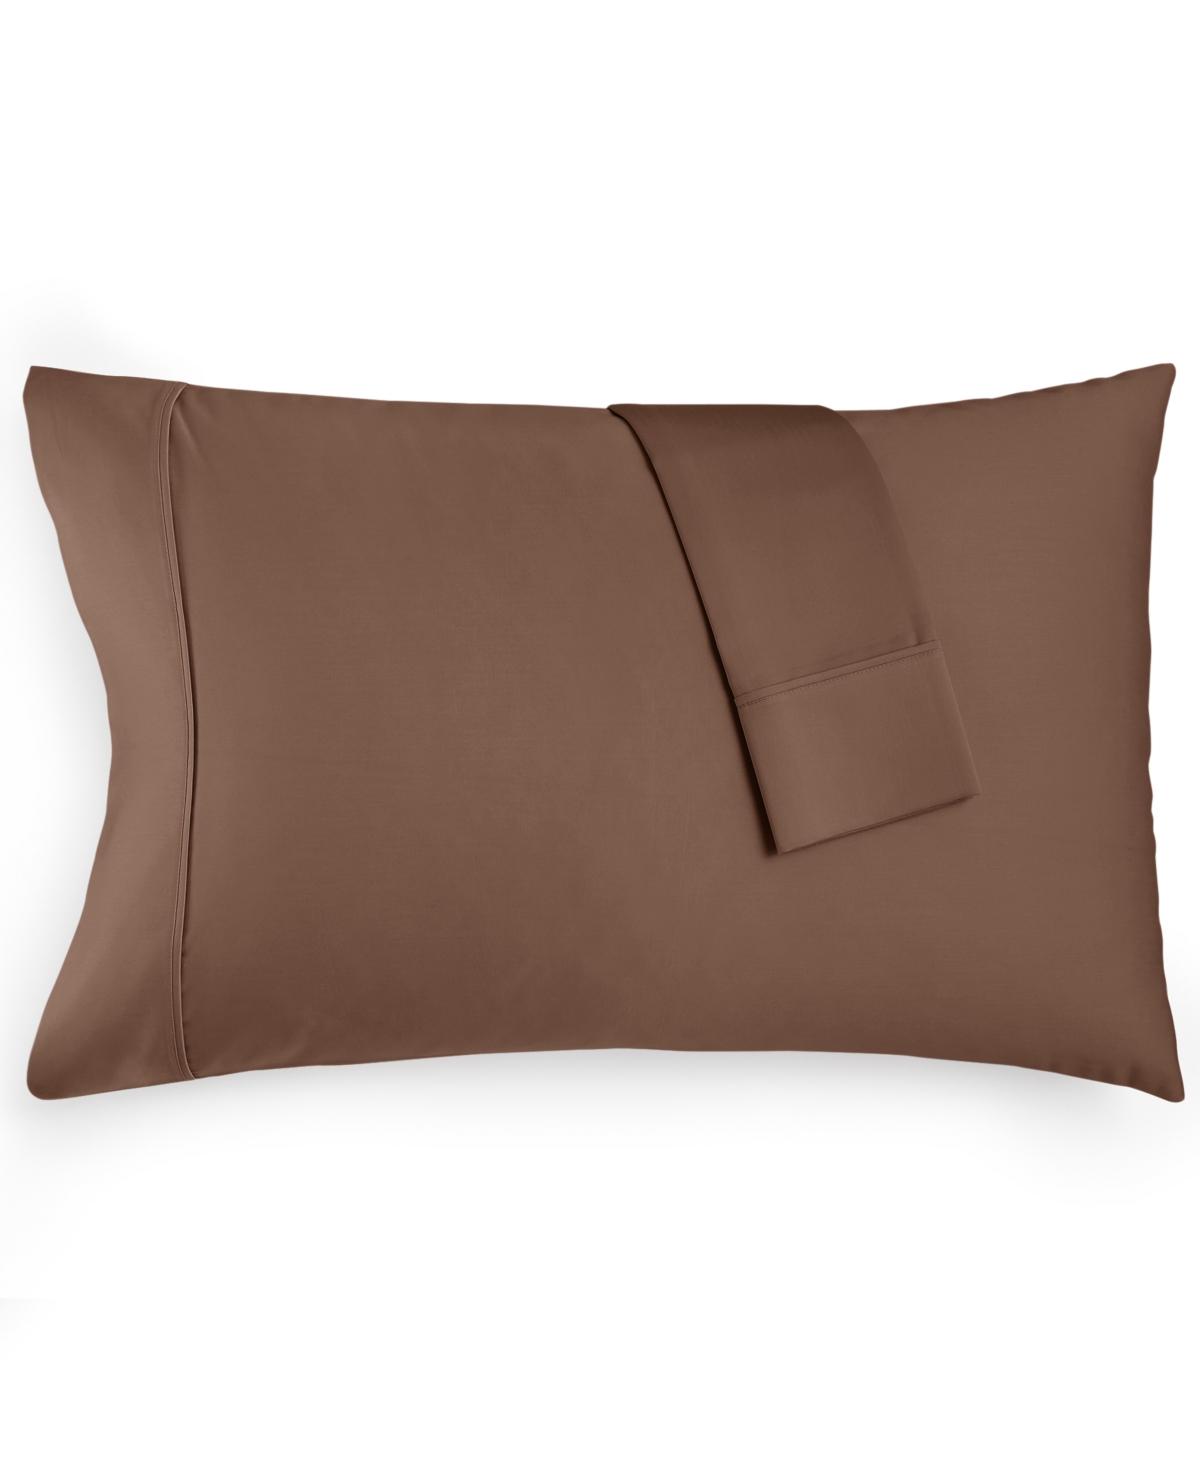 Shop Aq Textiles Bergen House 100% Certified Egyptian Cotton 1000 Thread Count Pillowcase, Standard In Brown